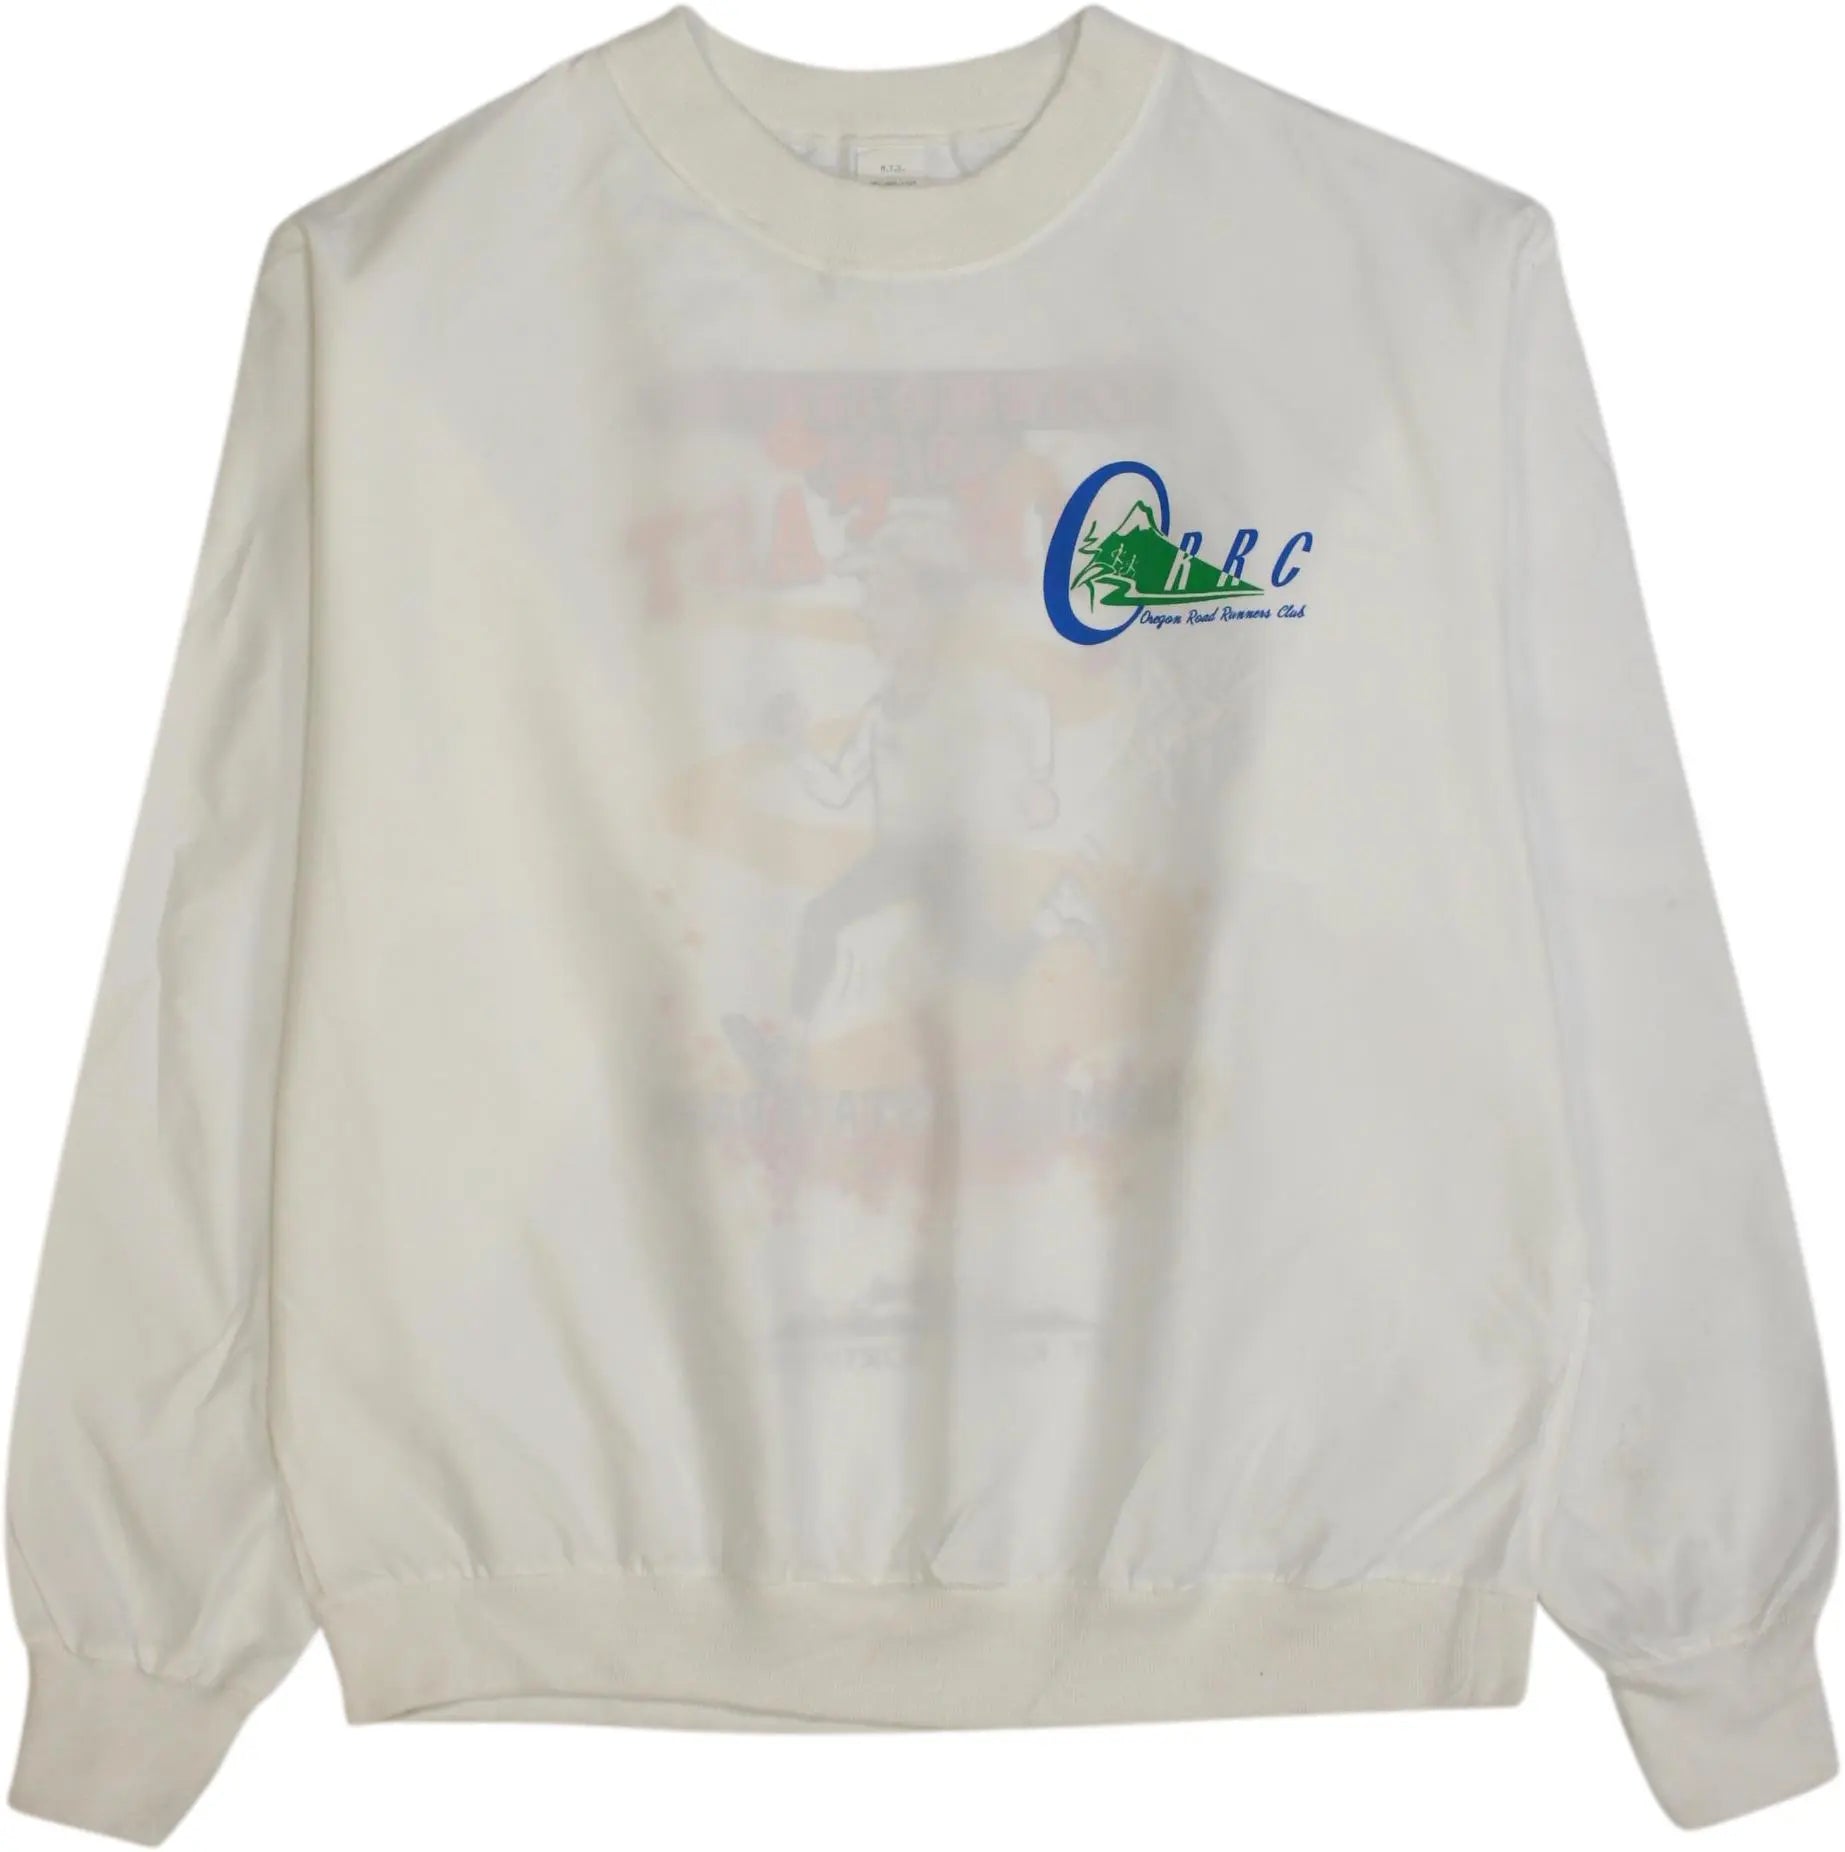 Unknown - ORRC Oregon Road Runners Club Crewneck Sweatshirt- ThriftTale.com - Vintage and second handclothing